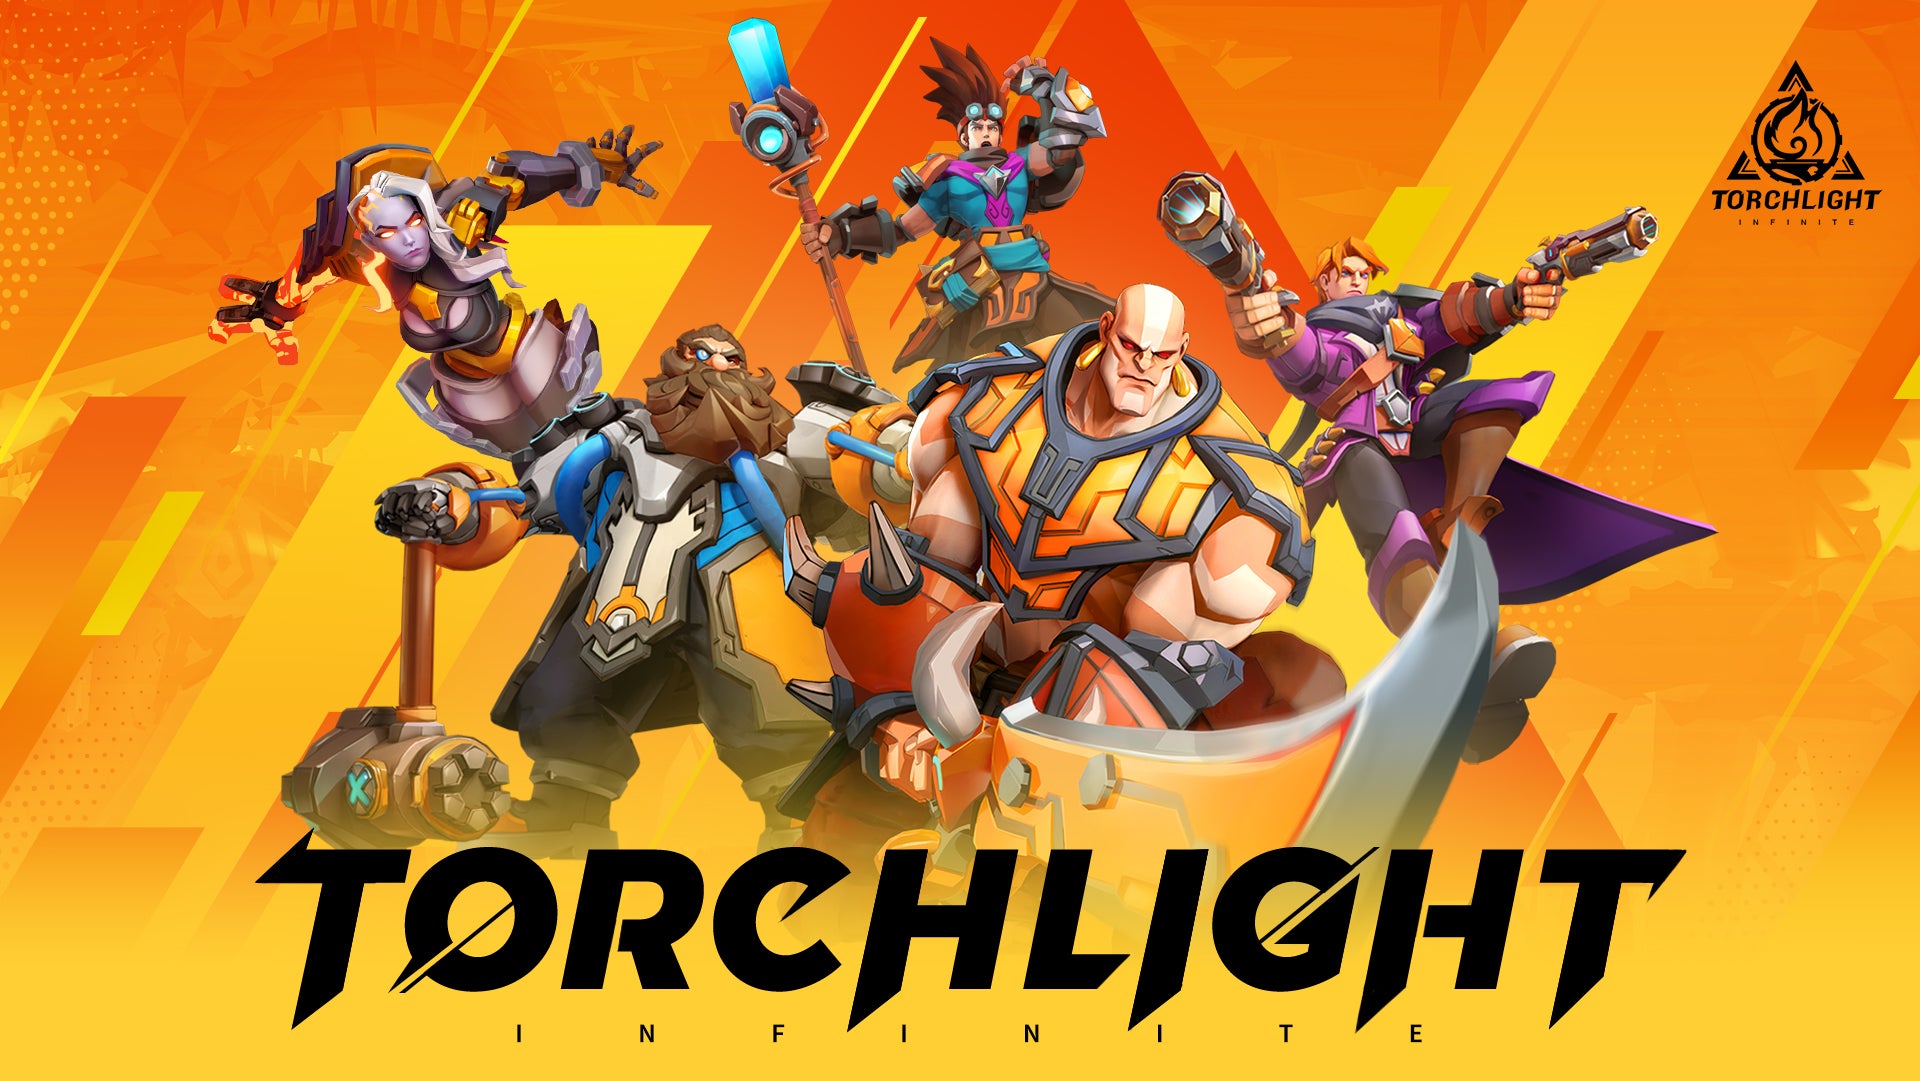 Torchlight Infinite Finally Enters Open Bata Testing On Android